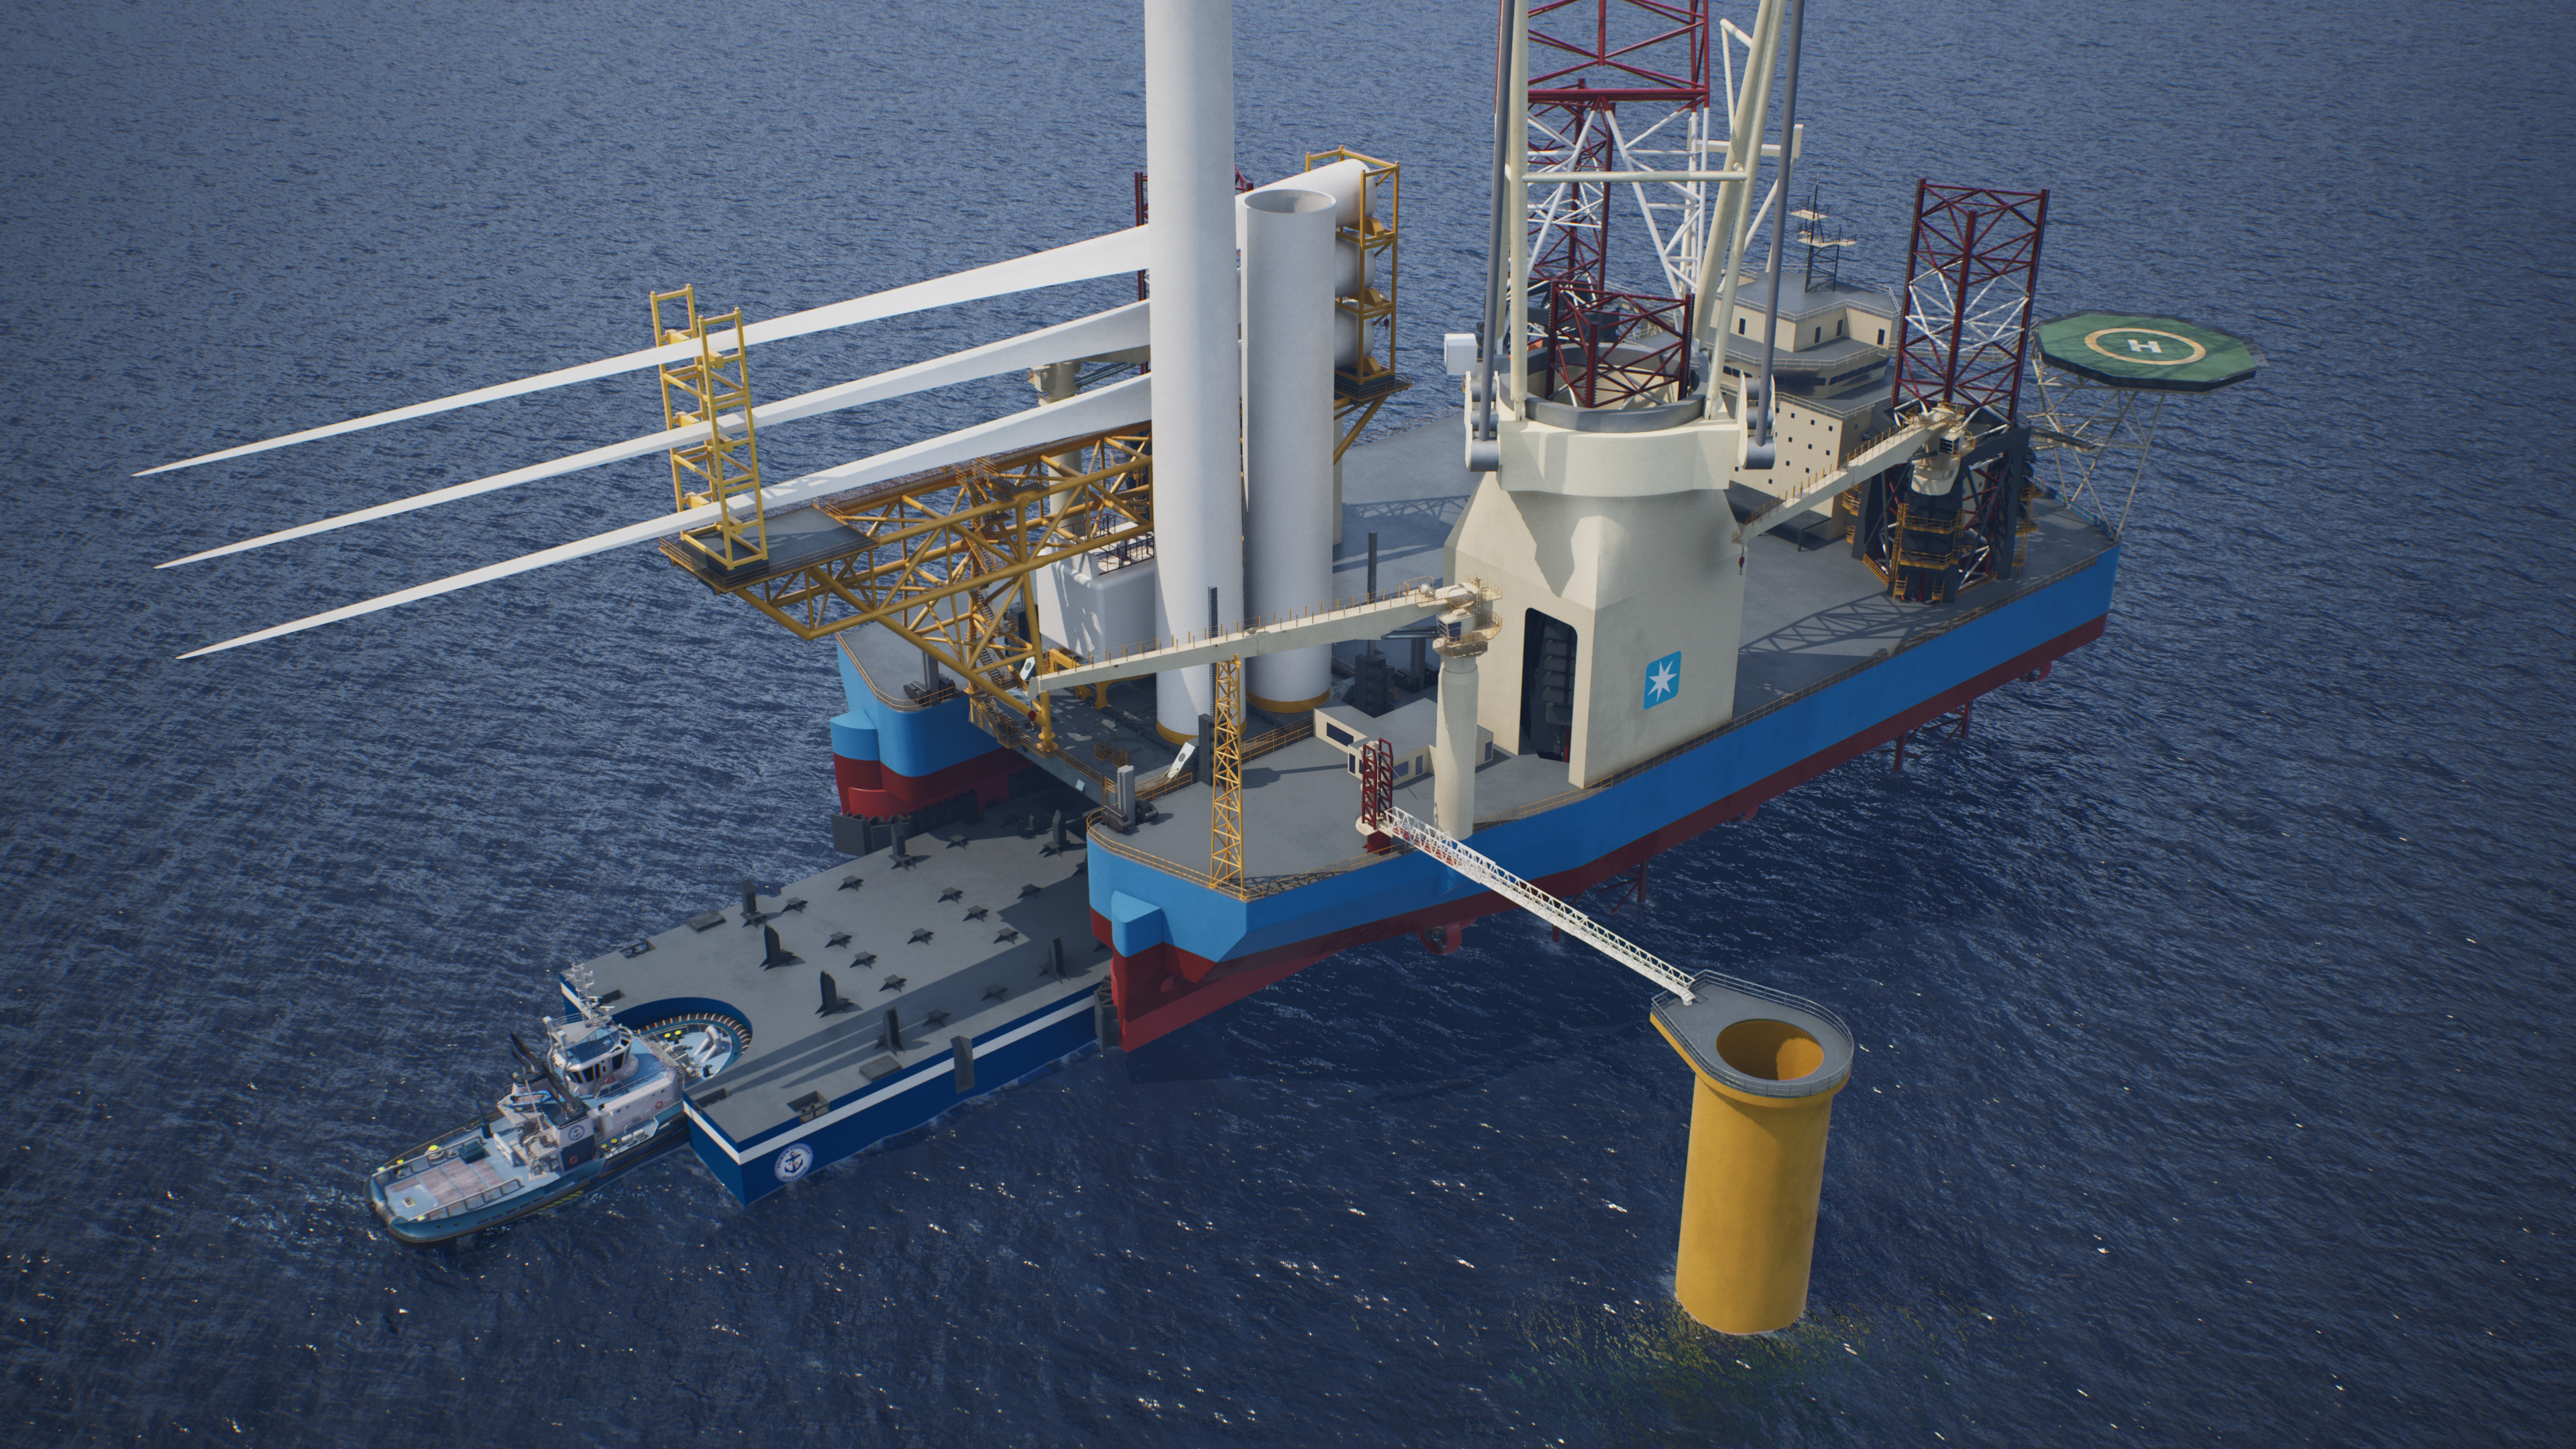 New partnership enables faster U.S. offshore wind installations